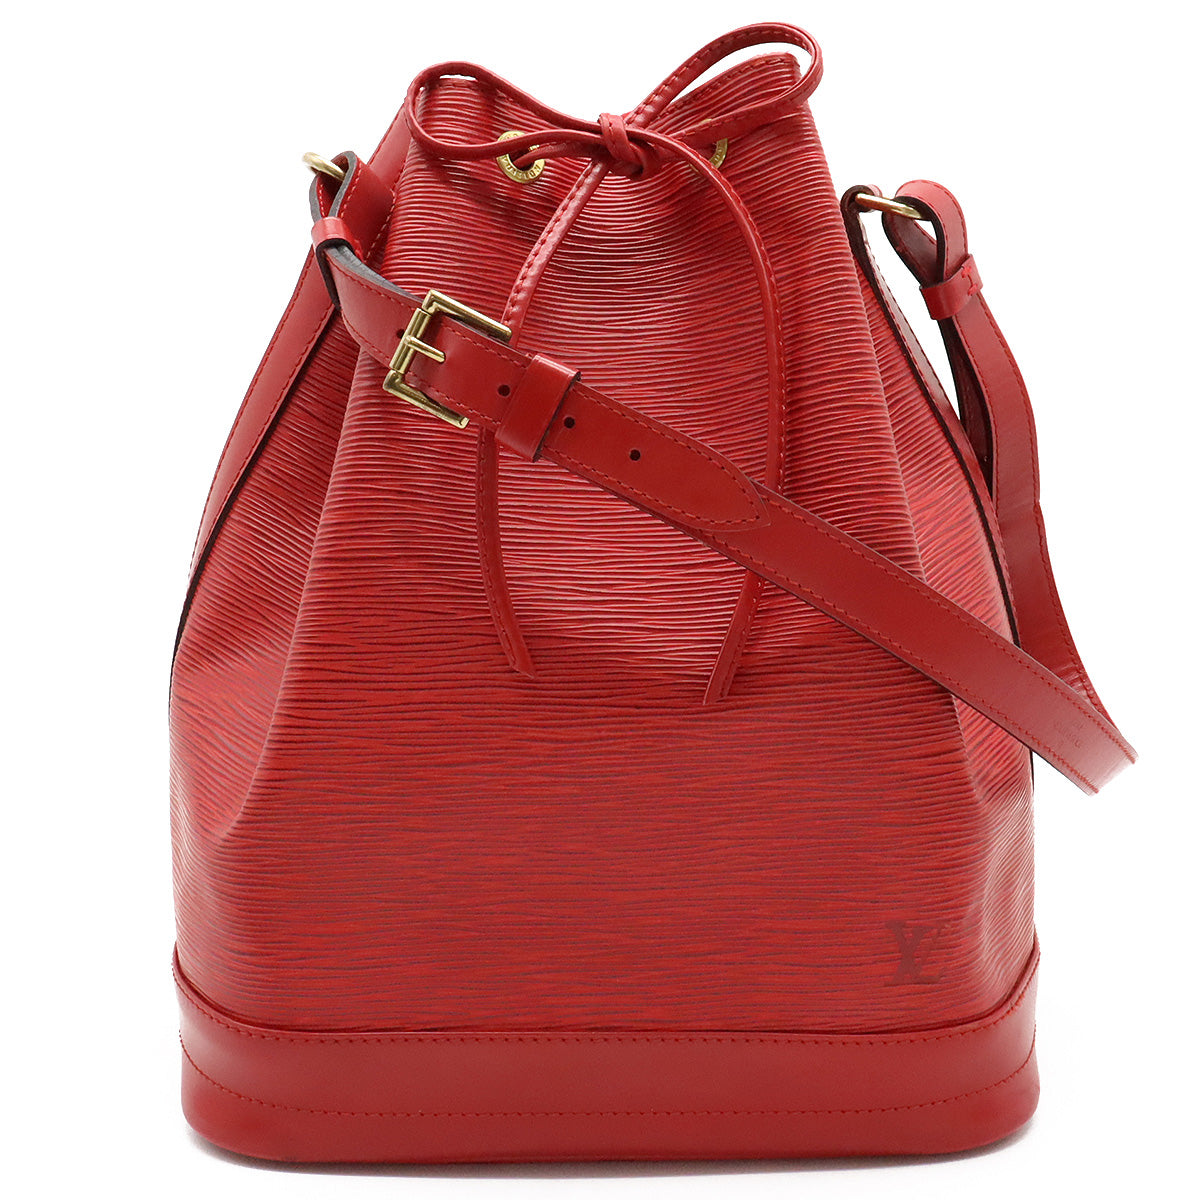 The charm and allure of Louis Vuitton's Capucines handbag